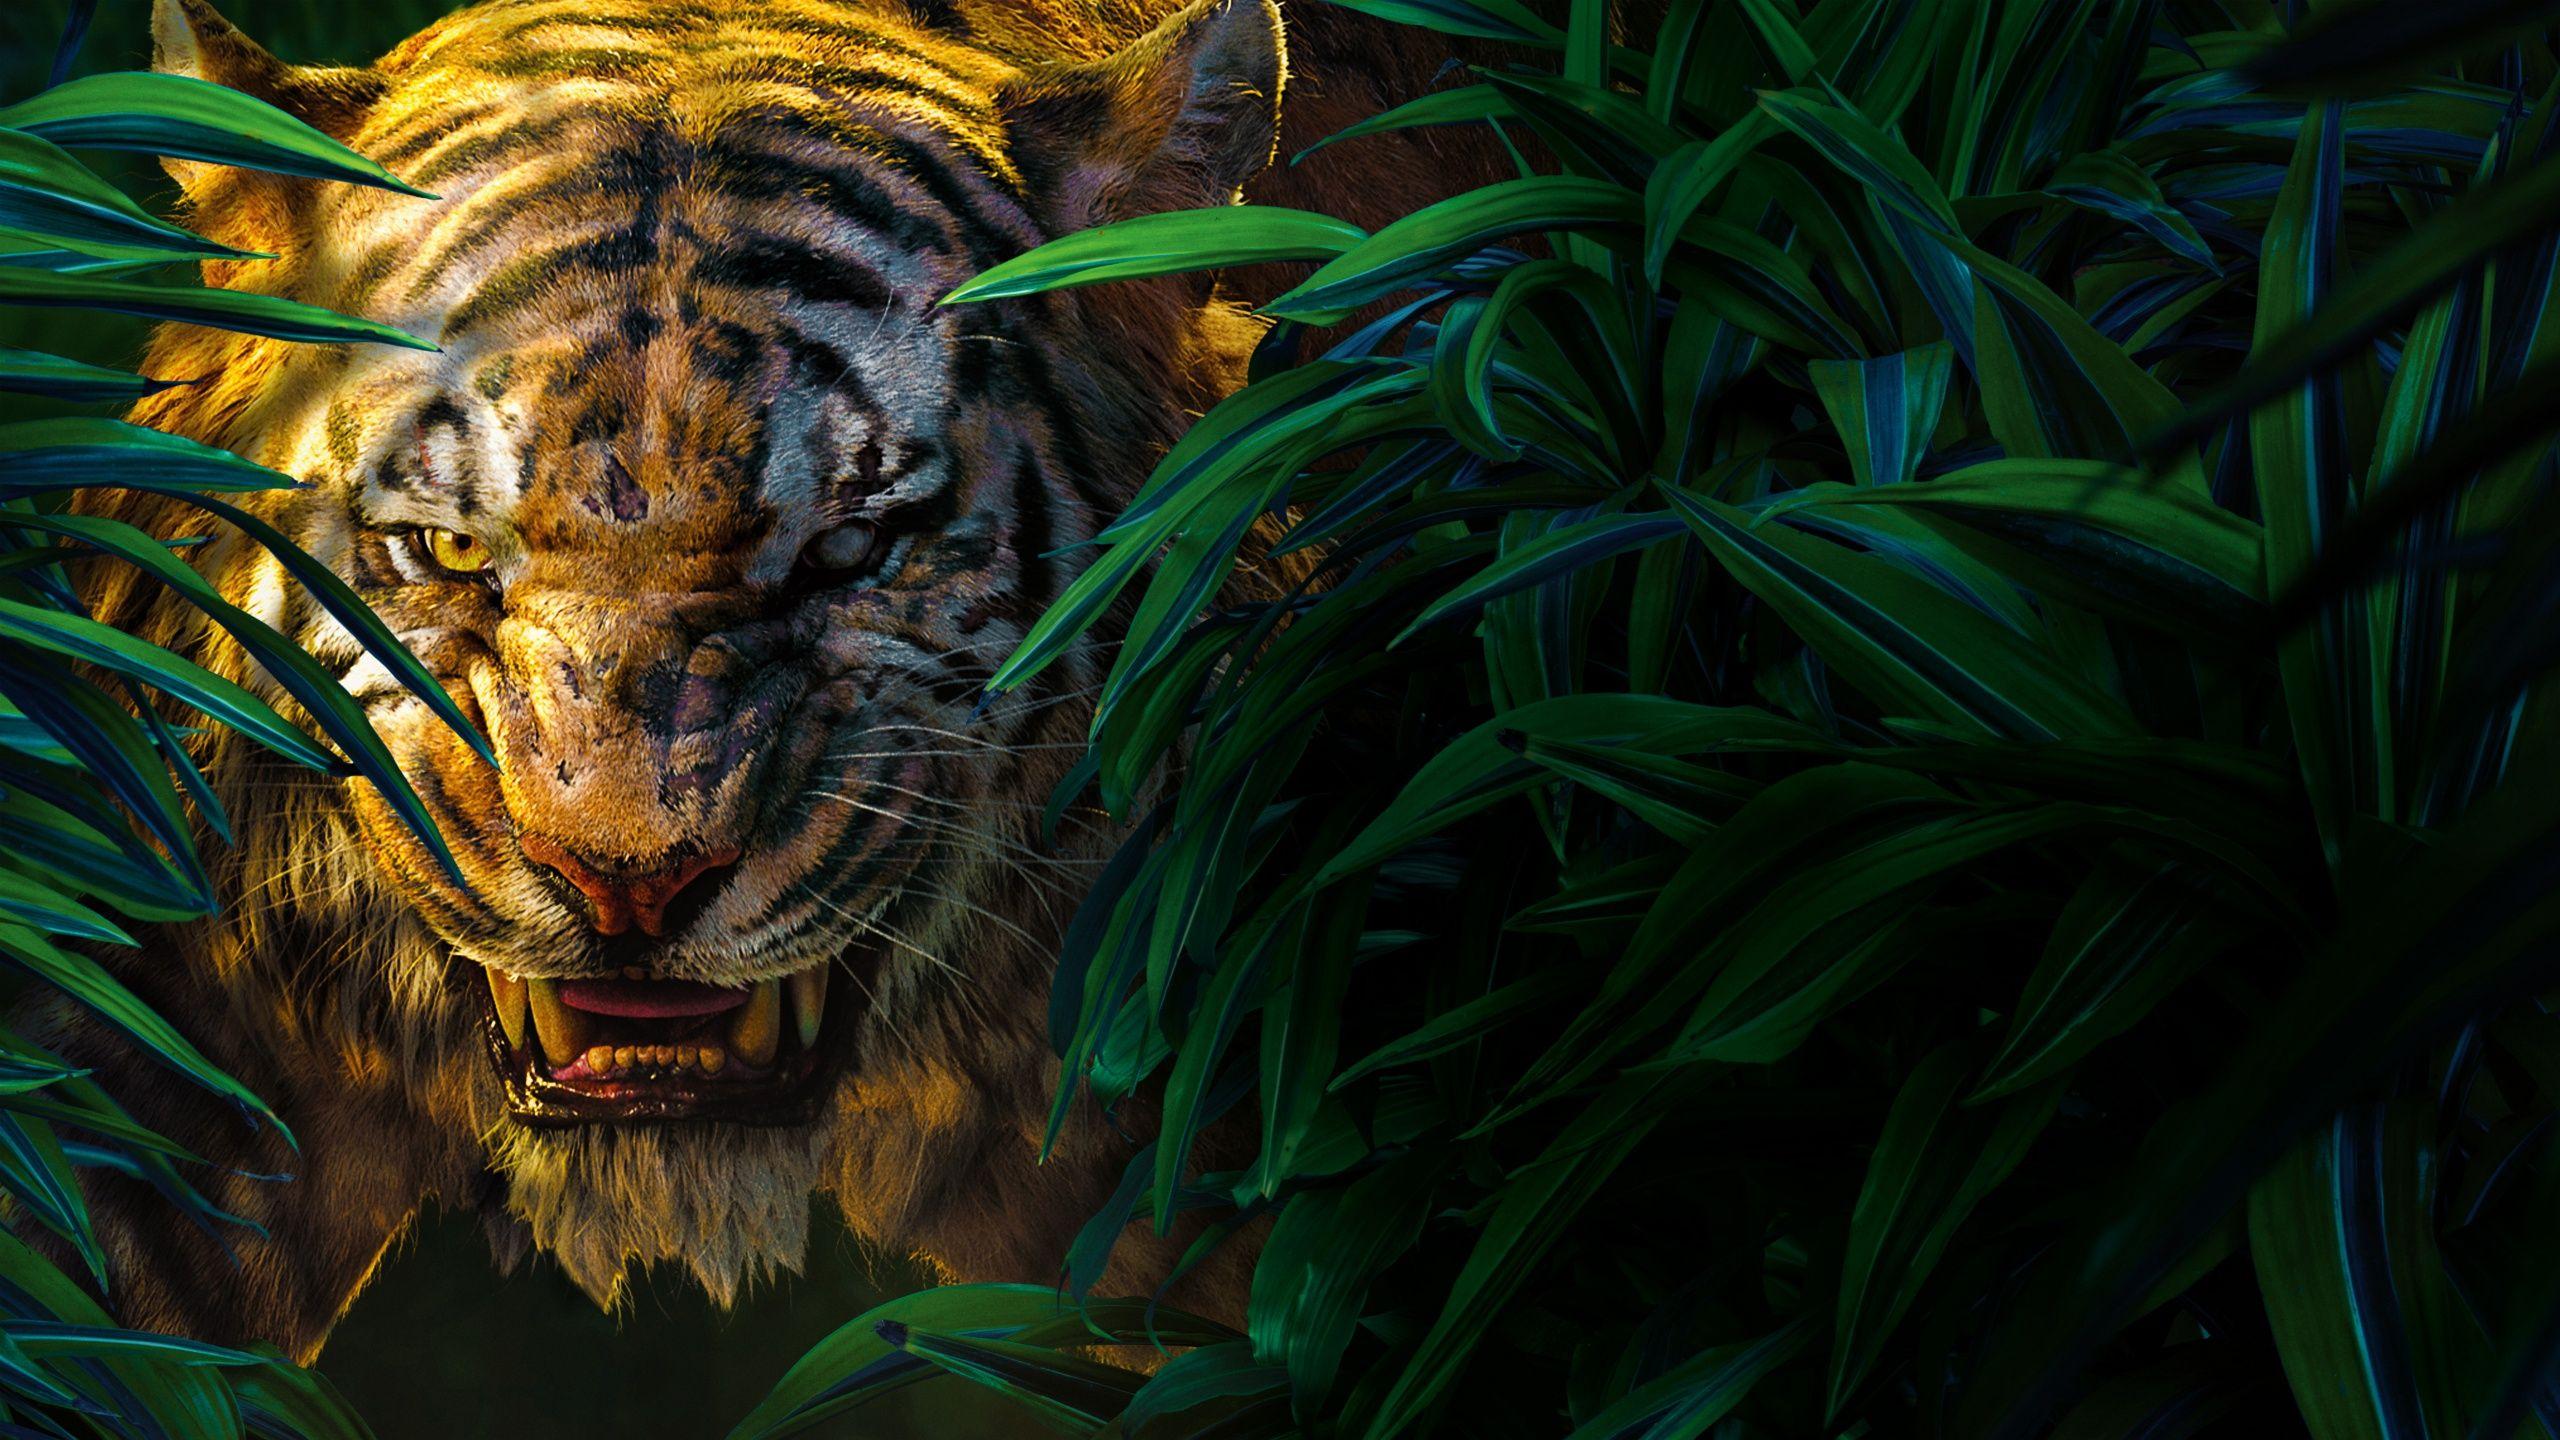 Jungle Book Shere Khan 5K Wallpapers in jpg format for free download